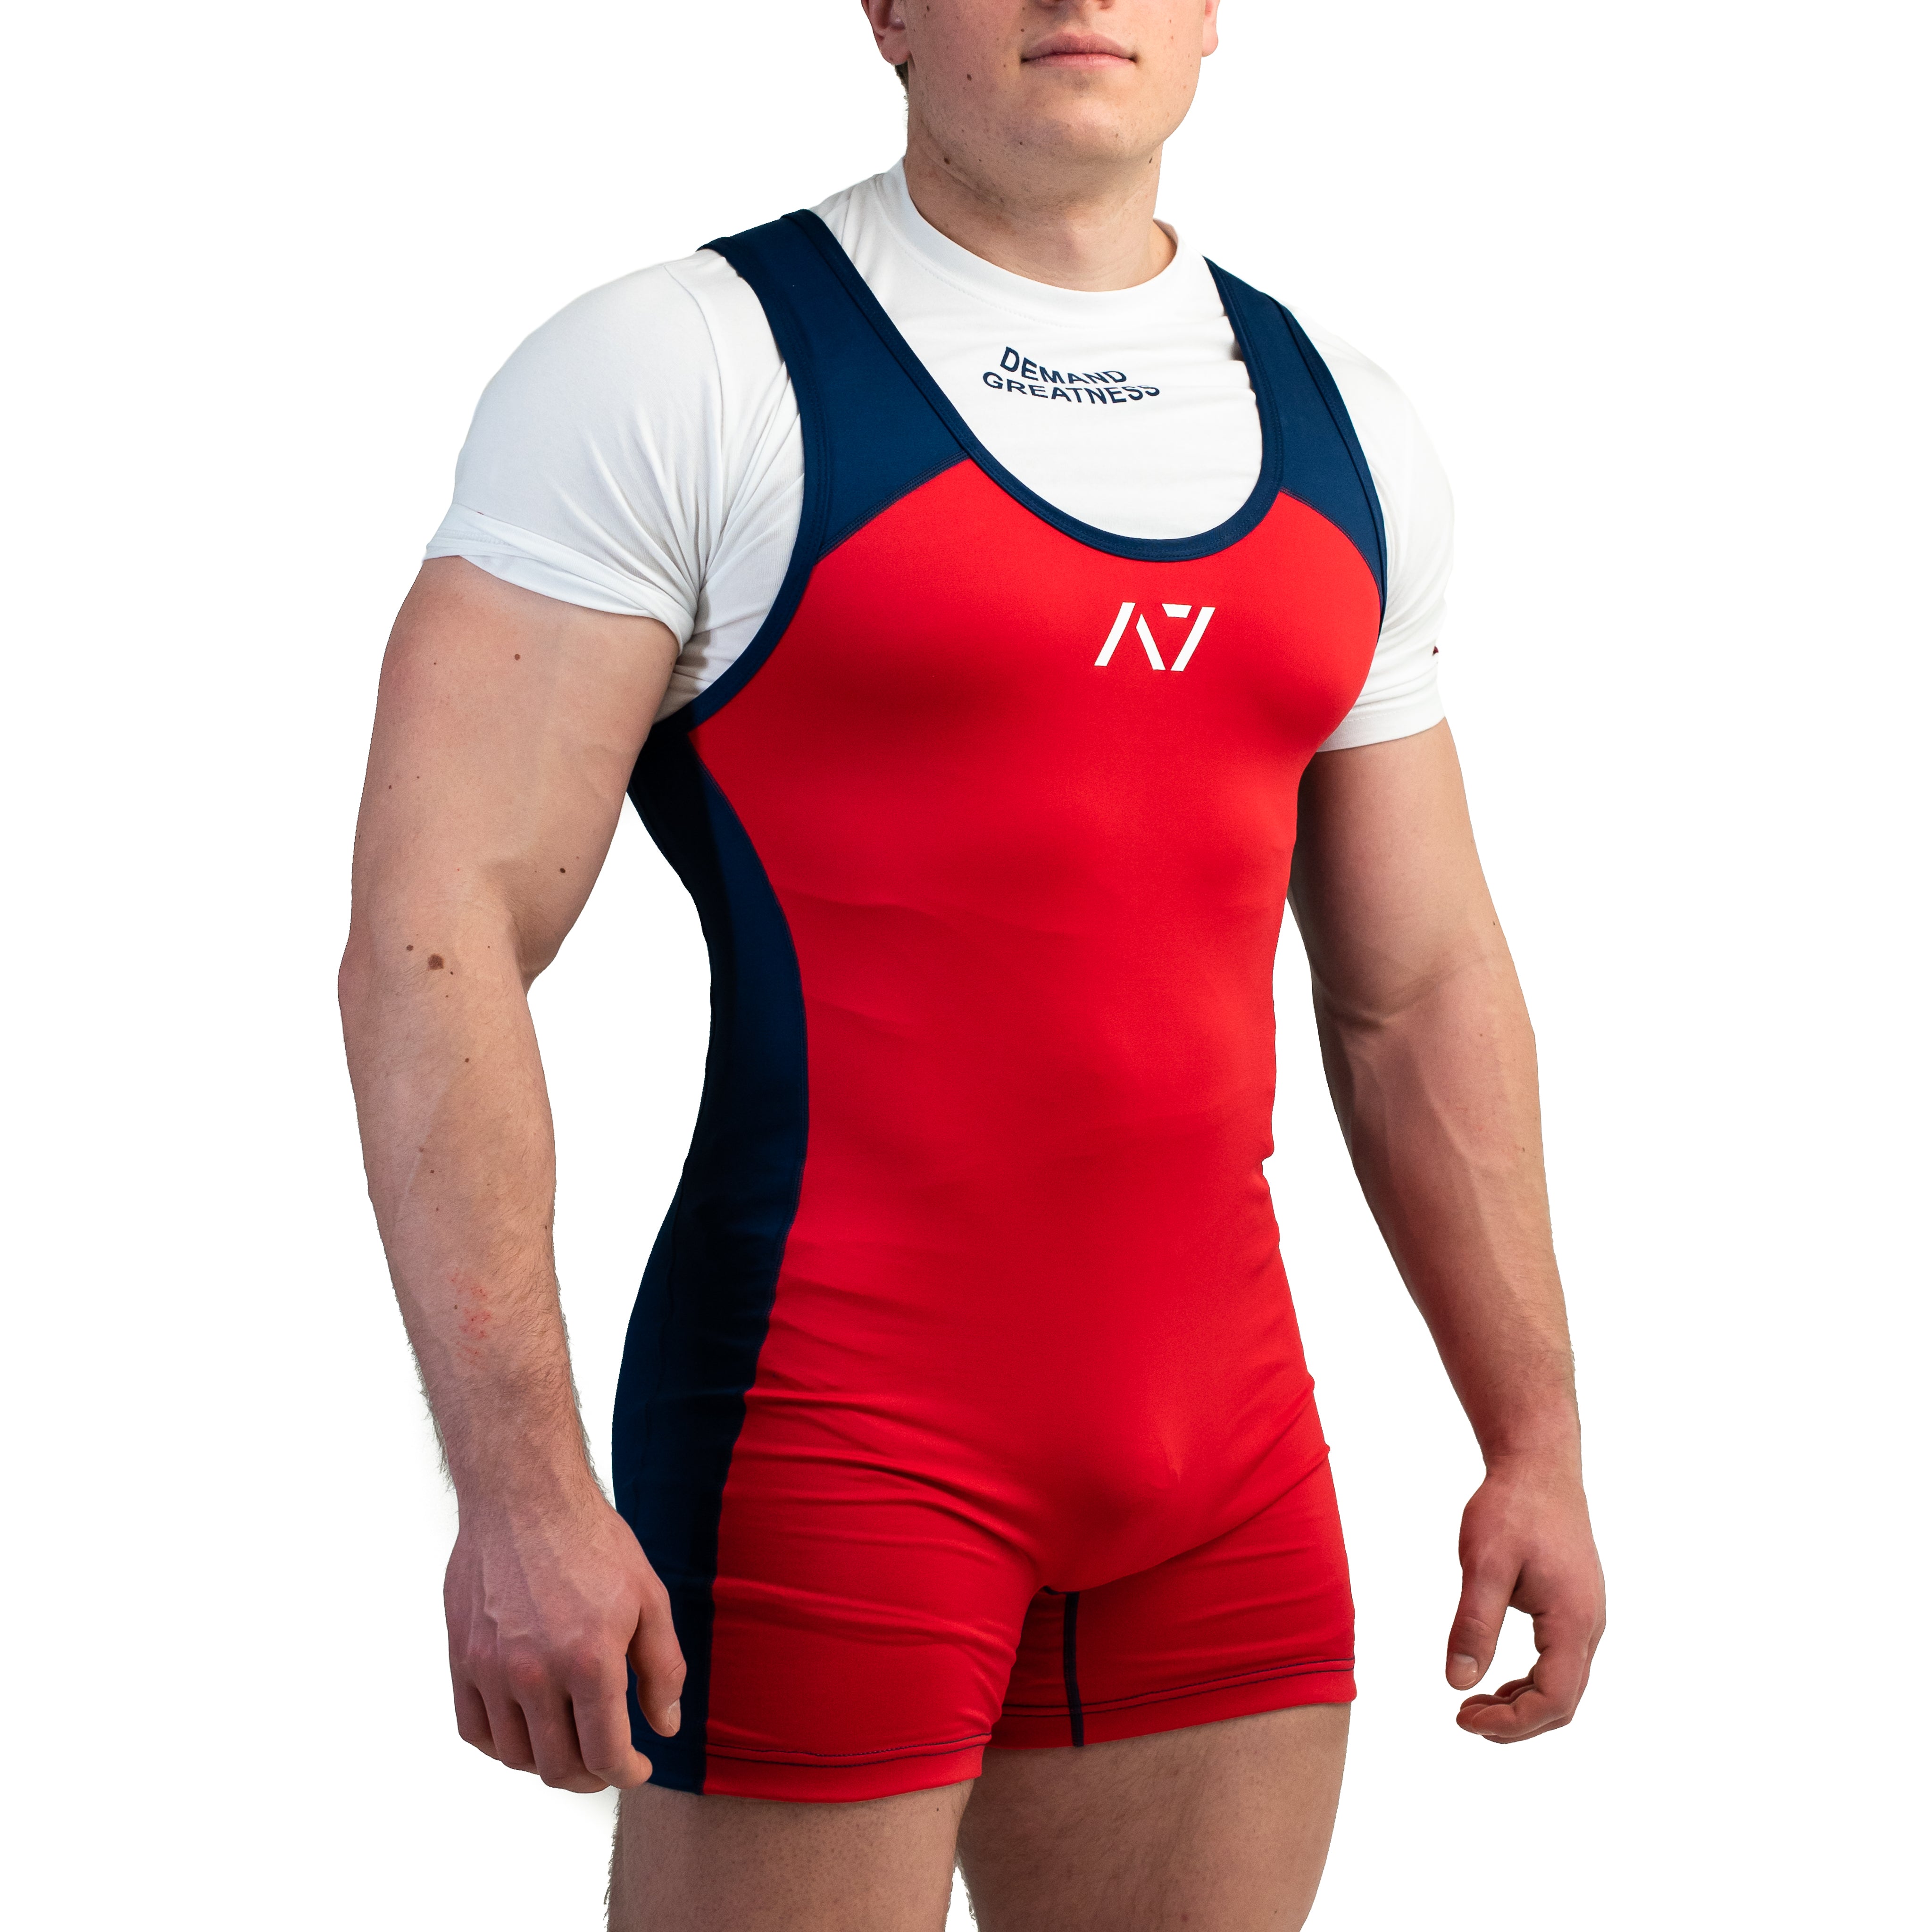 A7 Singlet - Red - IPF Approved